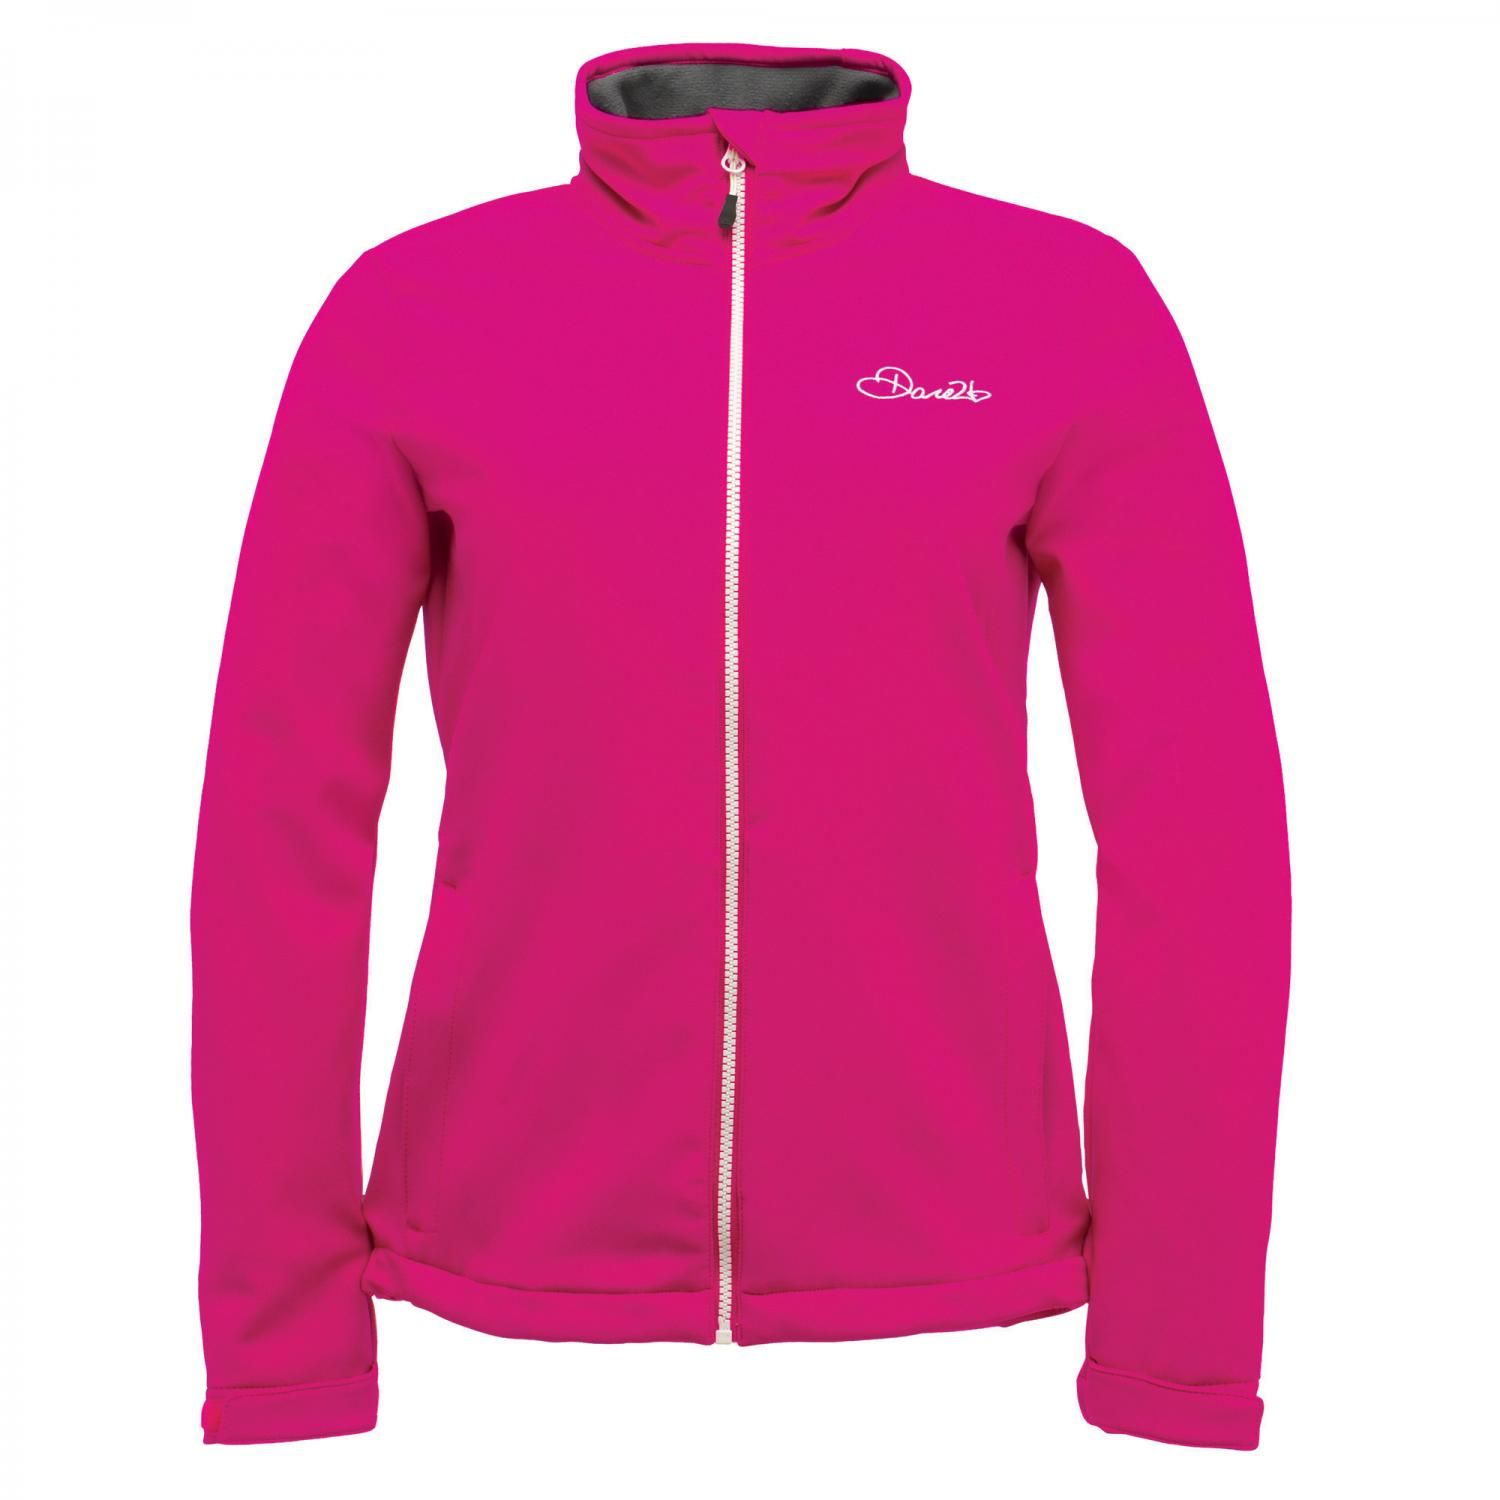 Ilus softshell warm backed woven fabric. Wind resistant fabric. Water repellent finish. 2 x lower handwarmer pockets. Adjustable cuffs. 96% Polyester, 4% Elastane. Dare 2B Womens Sizing (chest approx): 6 (30in/76cm), 8 (32in/81cm), 10 (34in/86cm), 12 (36in/92cm), 14 (38in/97cm), 16 (40in/102cm), 18 (42in/107cm), 20 (44in/112cm), 22 (46in/117cm), 24 (48in/122cm).